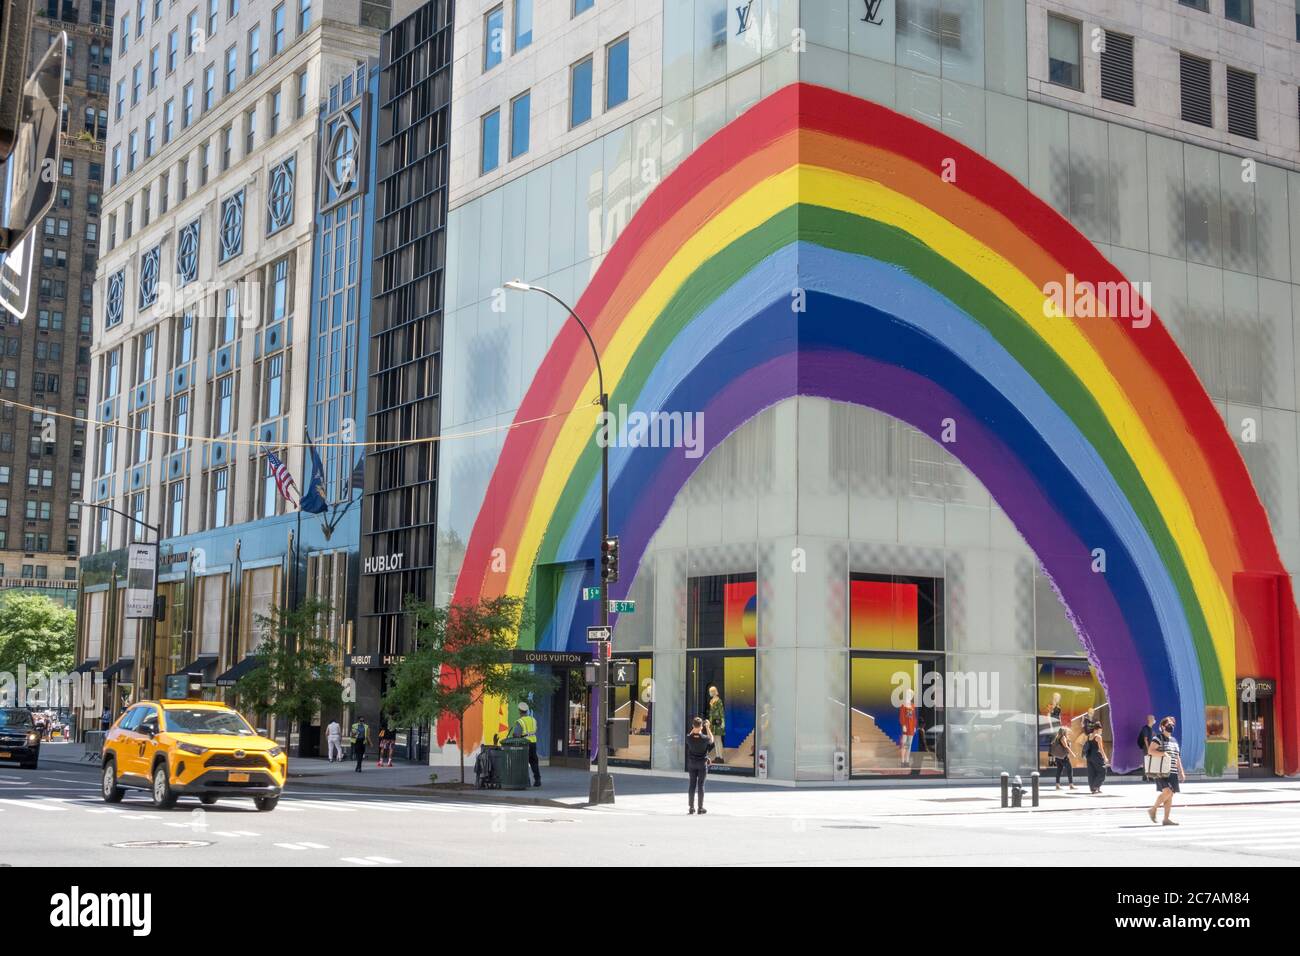 The Louis Vuitton store on Fifth Avenue is painted with rainbow